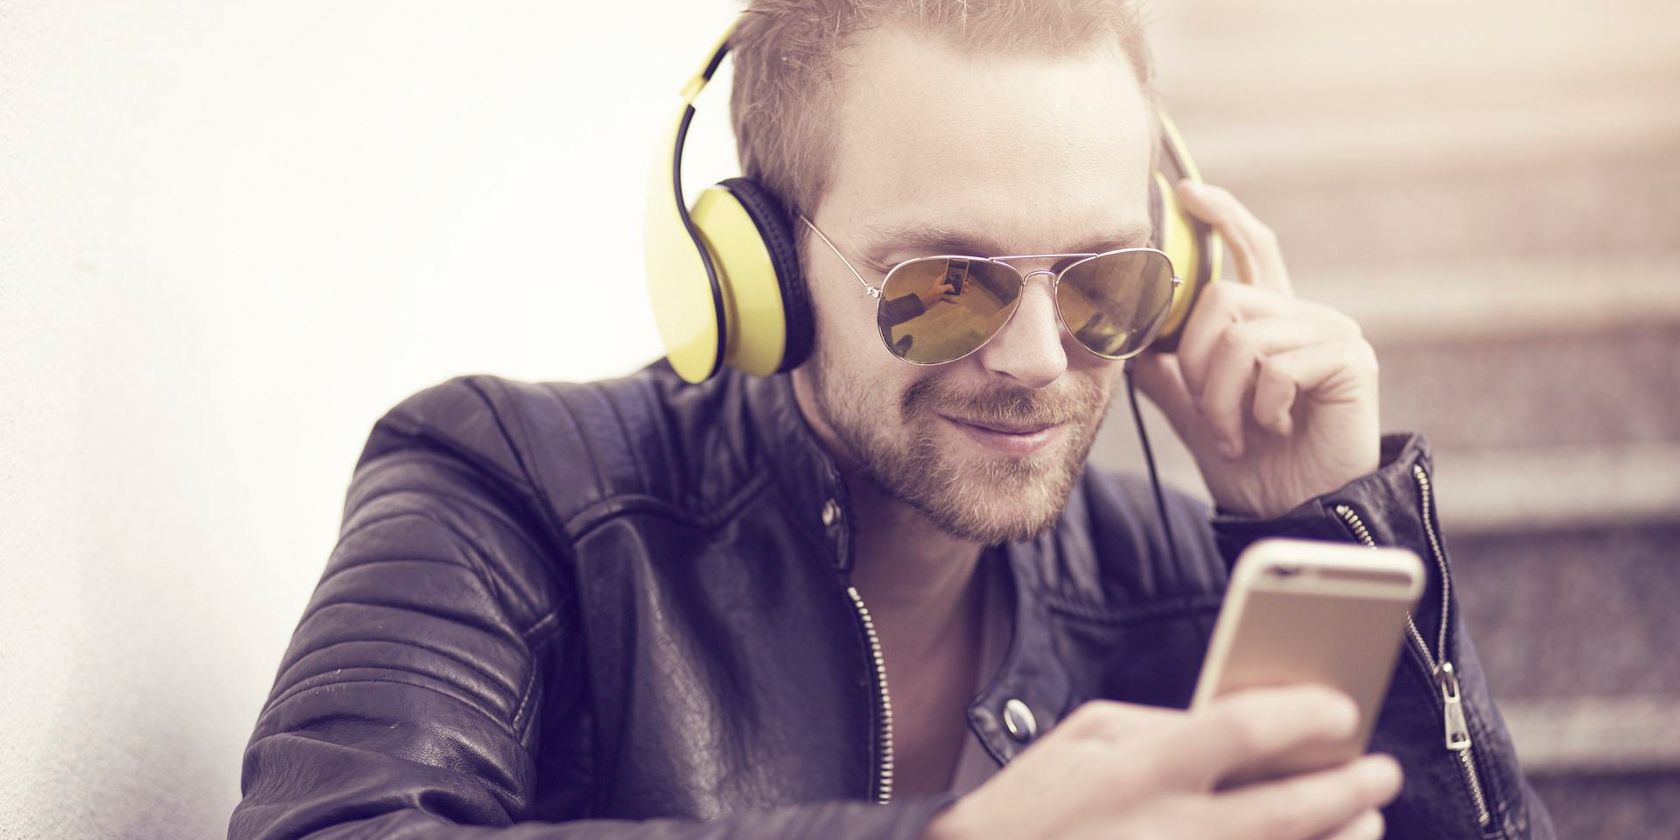 Photo of a man wearing sunglasses listening to music through headphones while looking at a phone